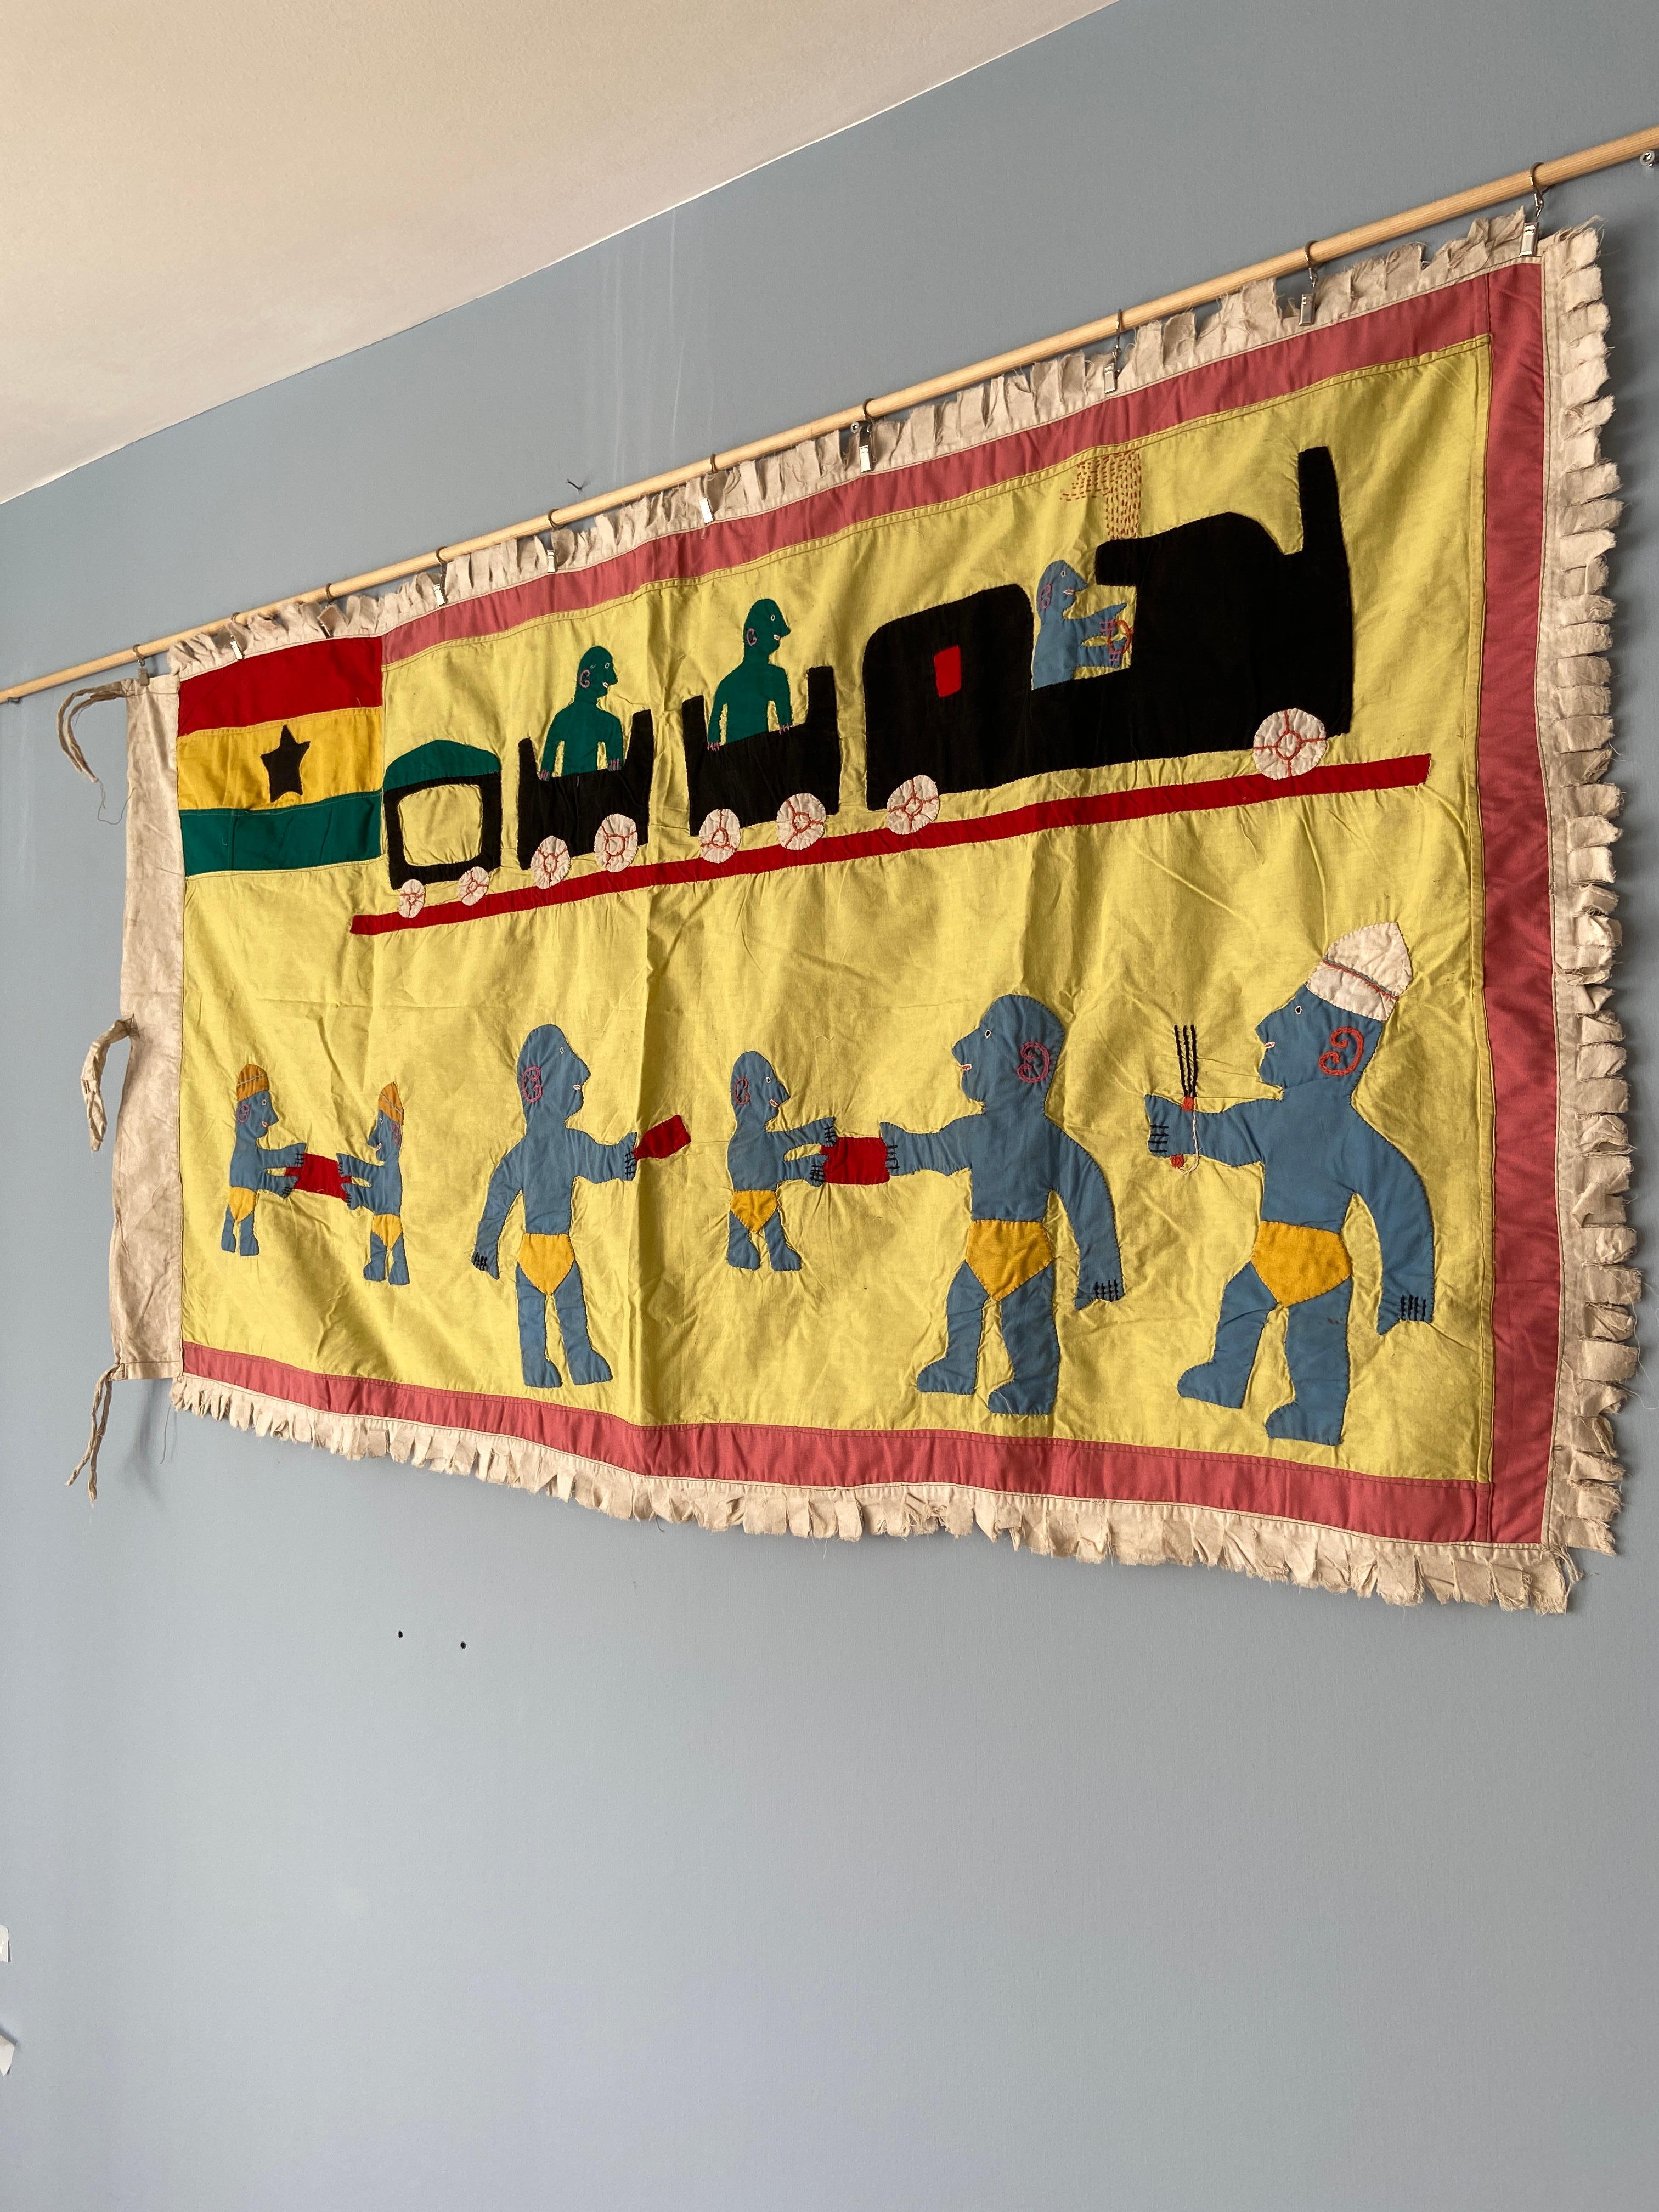 Ghana, 1970's

“Hard work does not break bones”

Fante Asafo flag in cotton applique patterns. Fante People.

Asafo Flags are created by the Fante People of Ghana. The flags are visual representations of military organisations in Fante